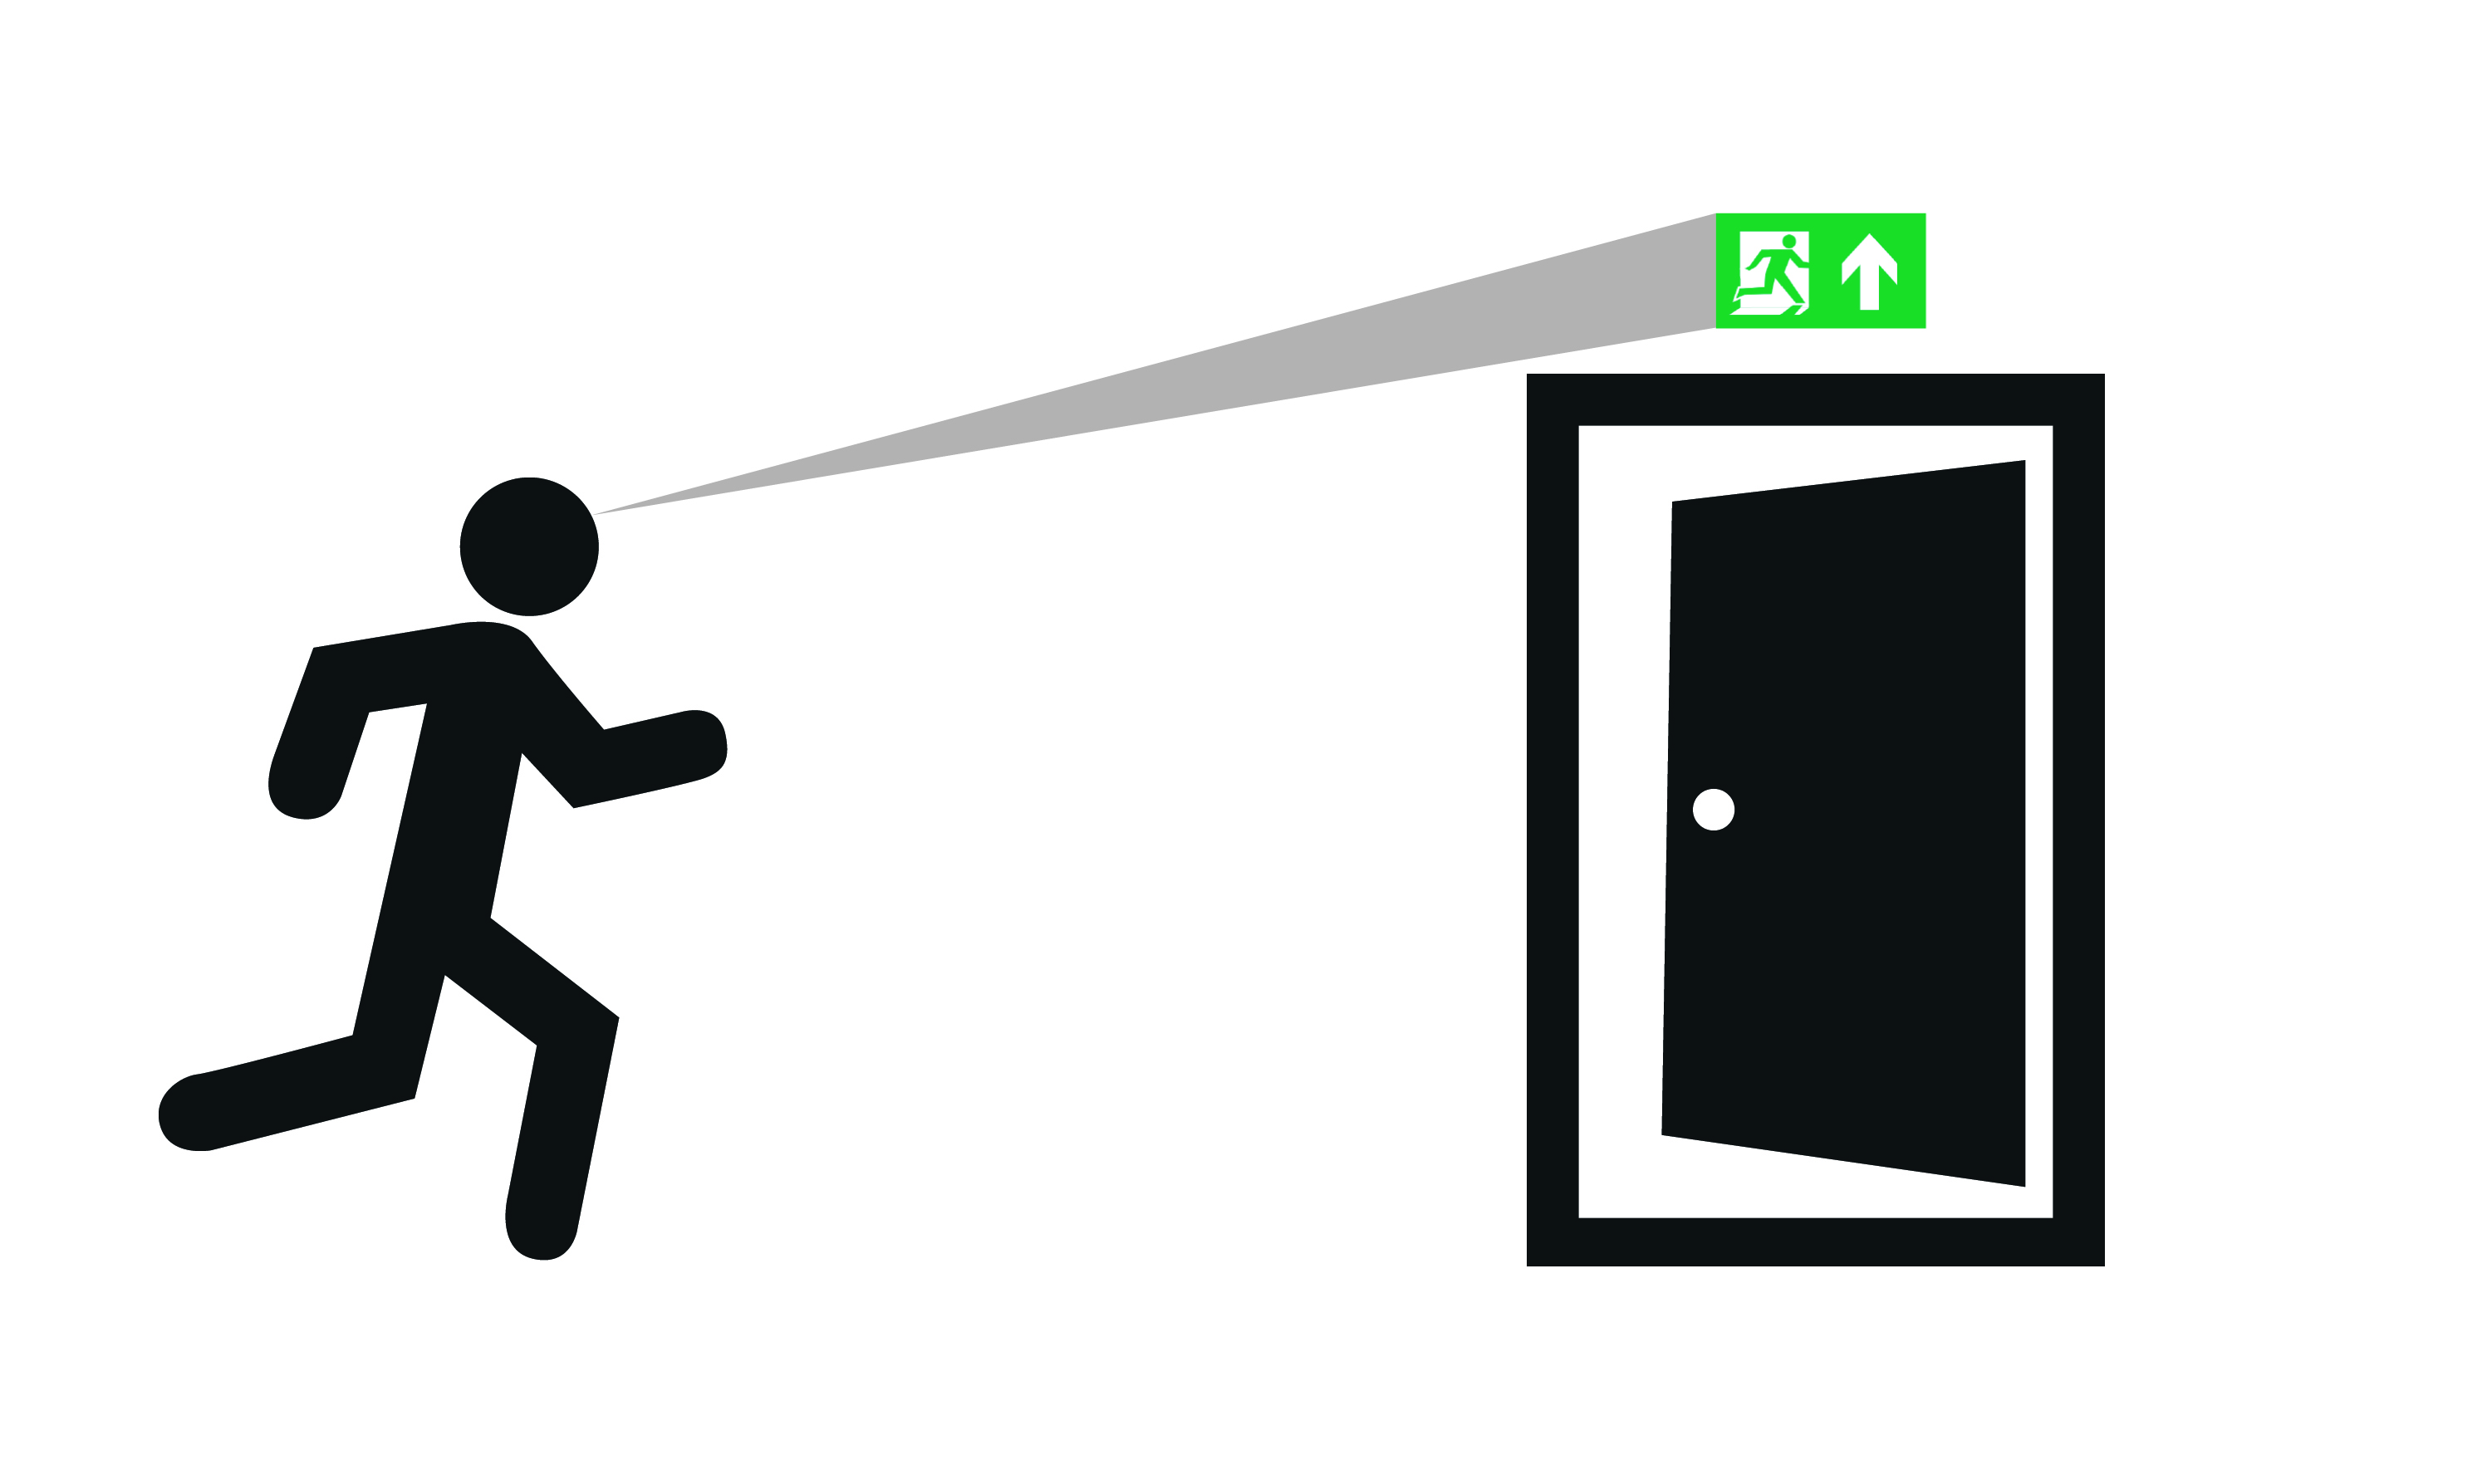 Internal exit sign viewing distance